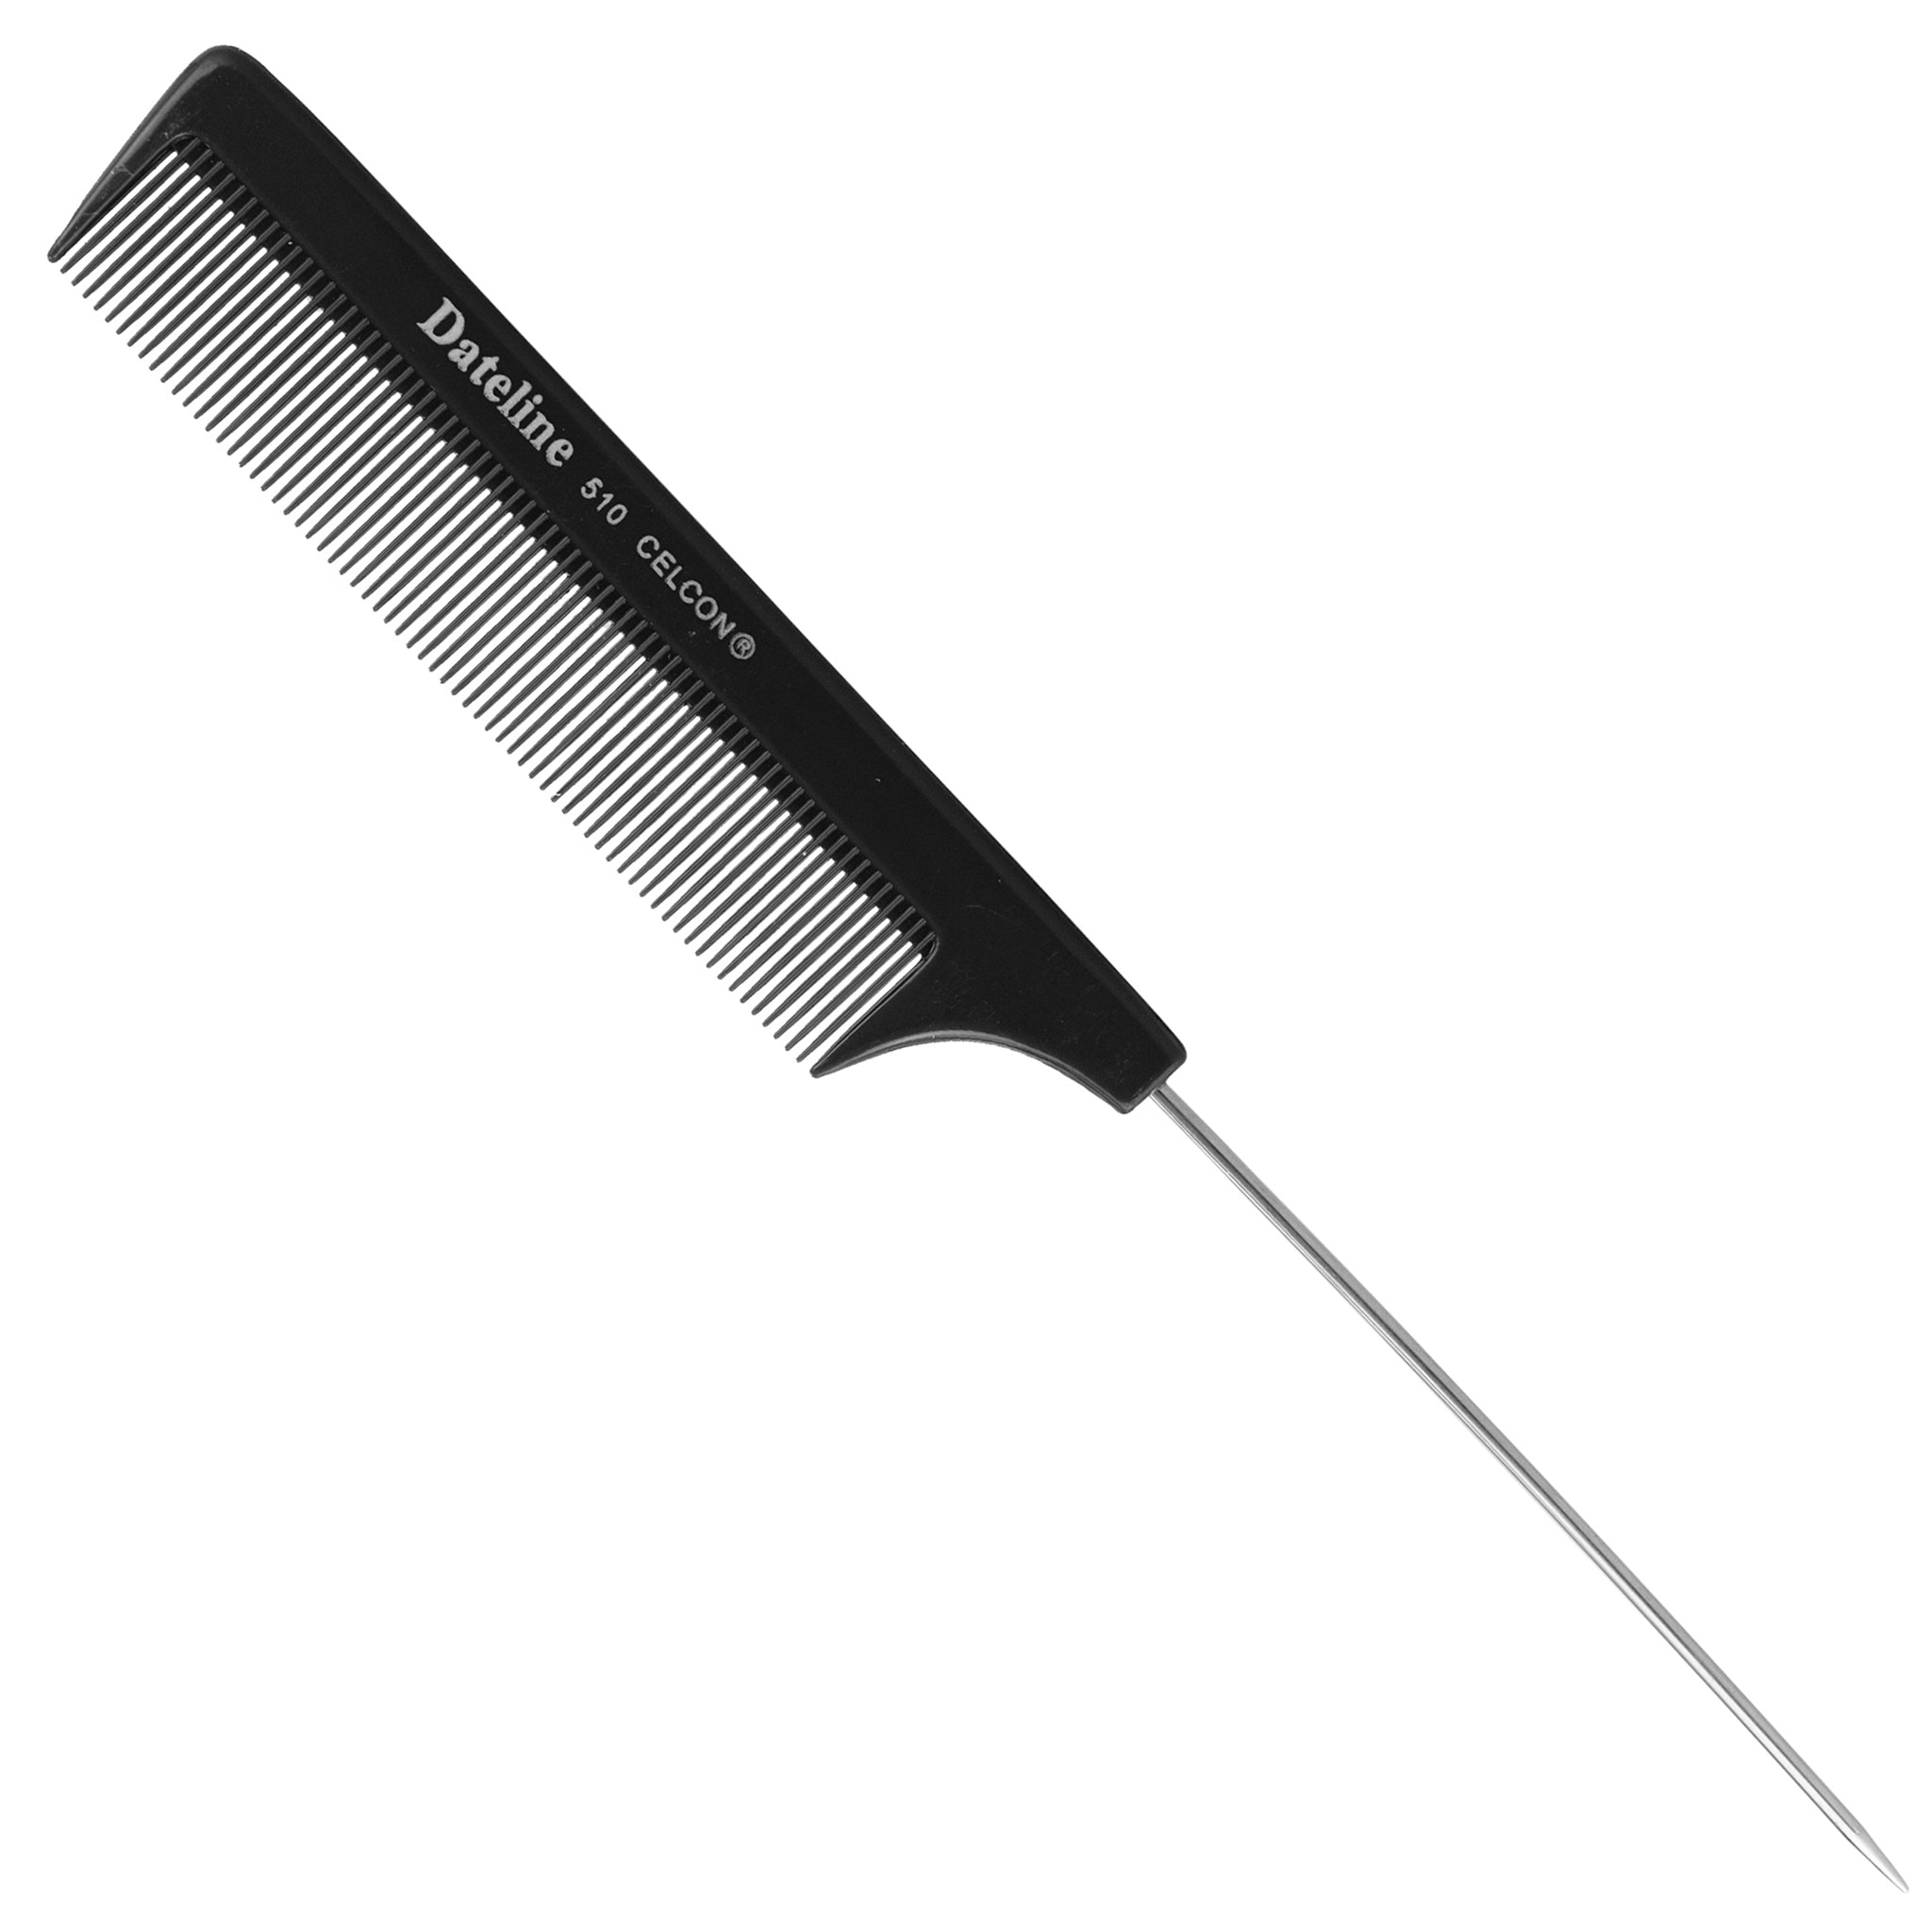 Black Celcon Tail Comb 510 - Stainless Steel Pins